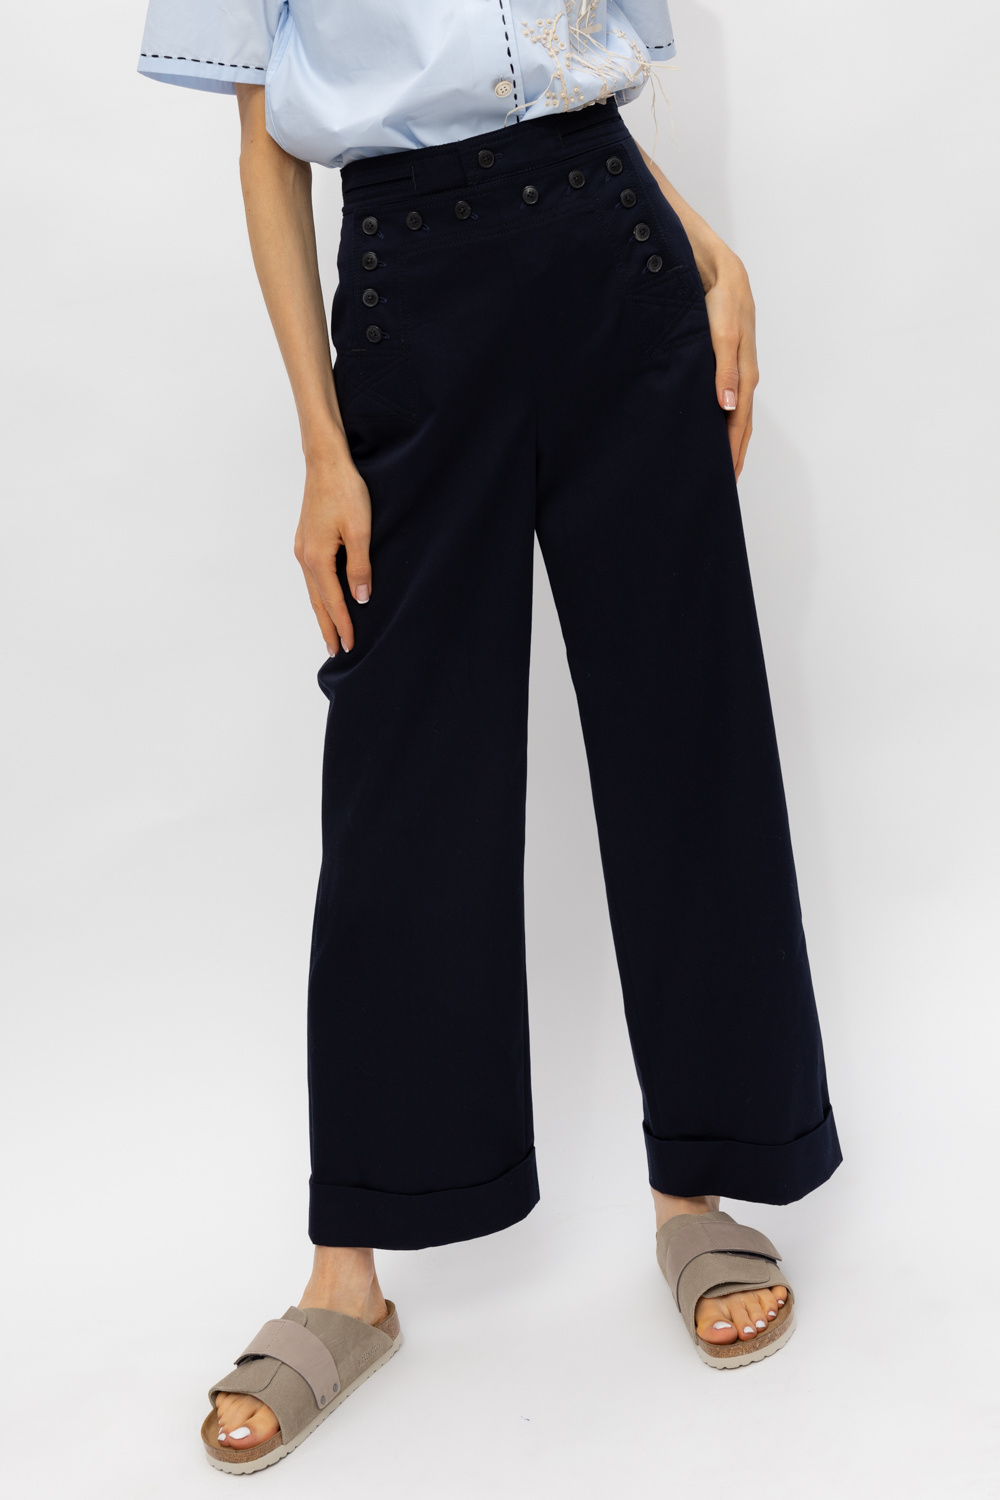 Tory Burch Trousers with buttons